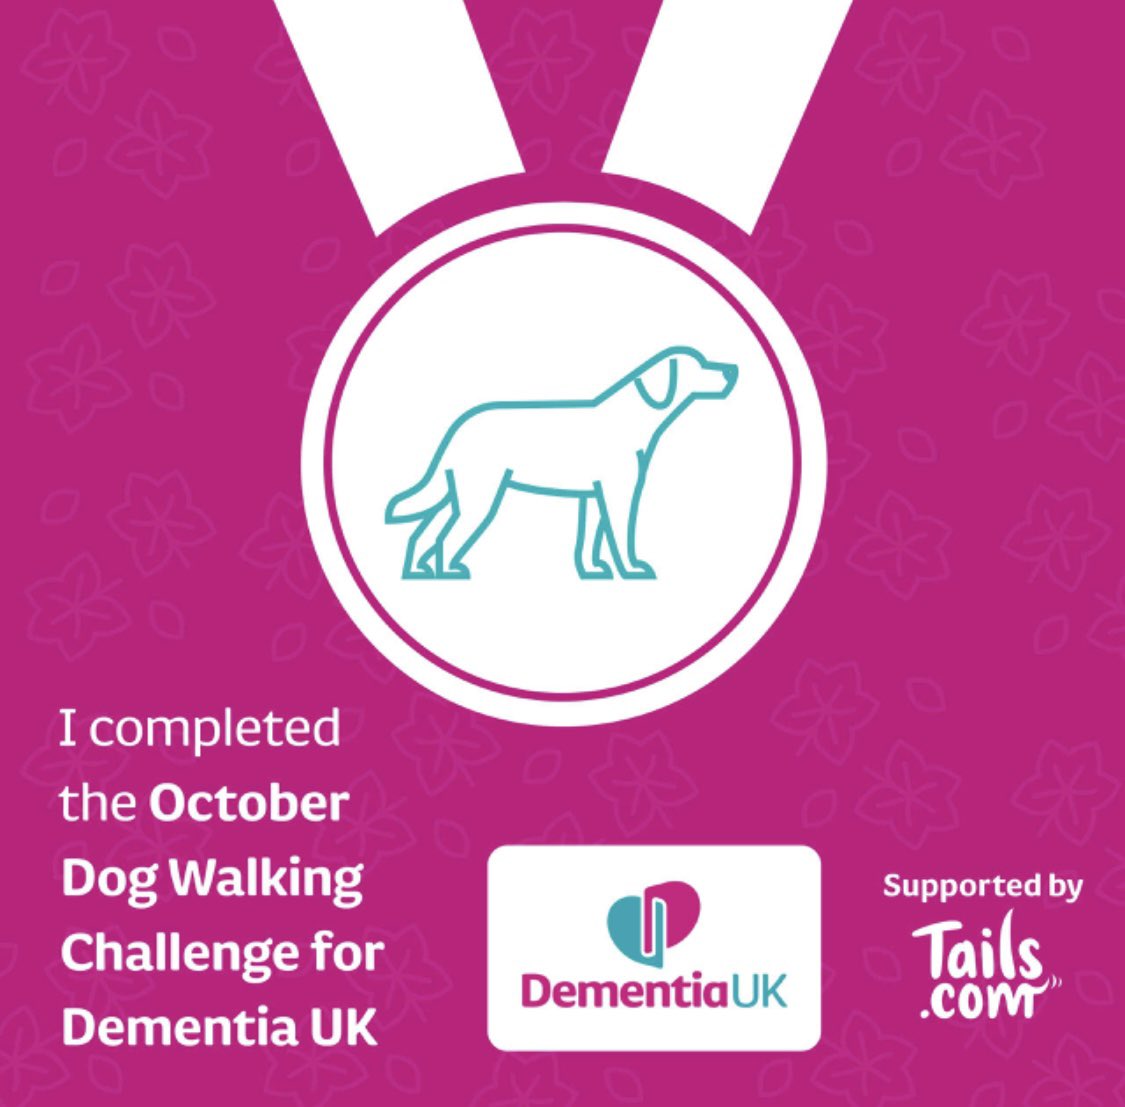 THANK YOU to my friends who sponsored me for the £100k walk last month. So happy to hear that we raised a total of £365,878.18!! That will go such a long way to support families like mine going through the dementia maze. Thank you 🙏🏻 #dementiauk #fuckyoudementia